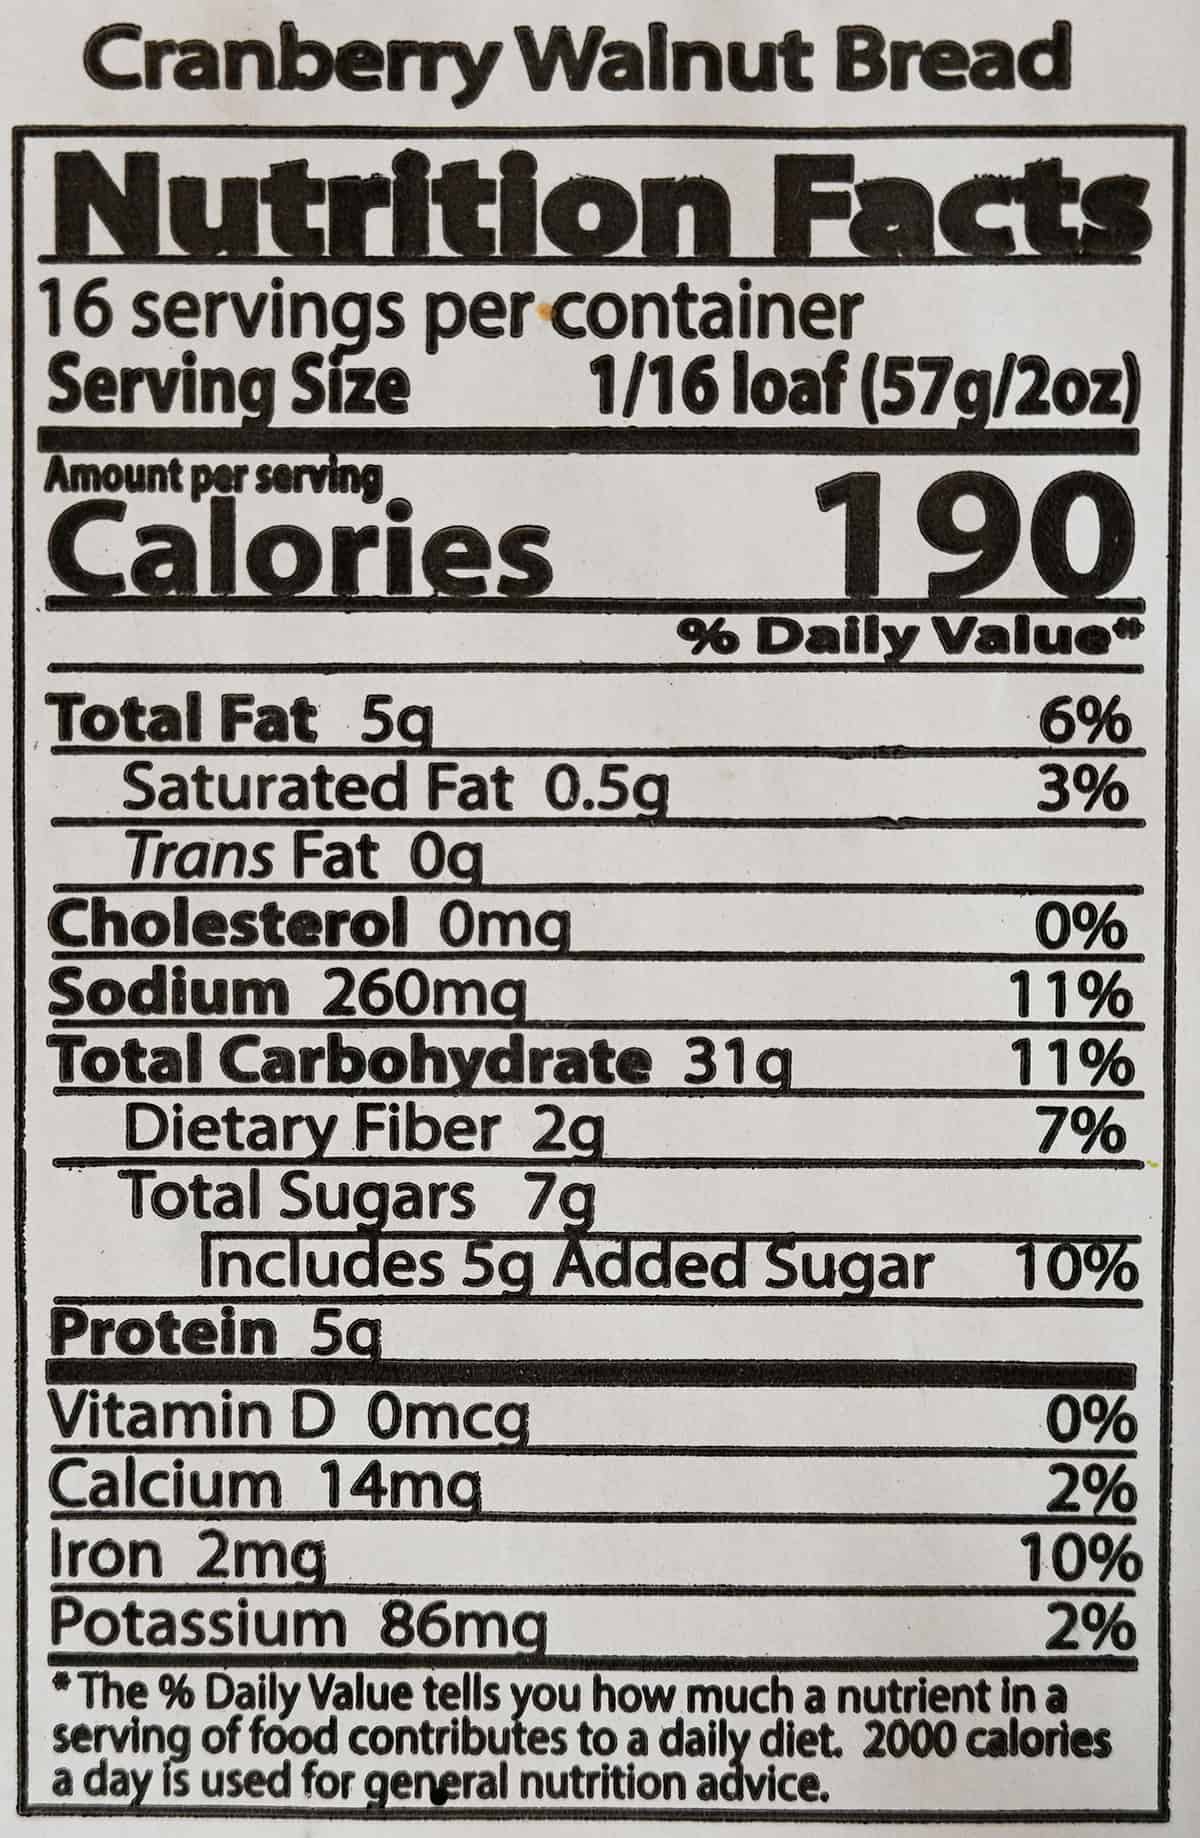 Image of the nutrition facts for the cranberry walnut bread from the package.